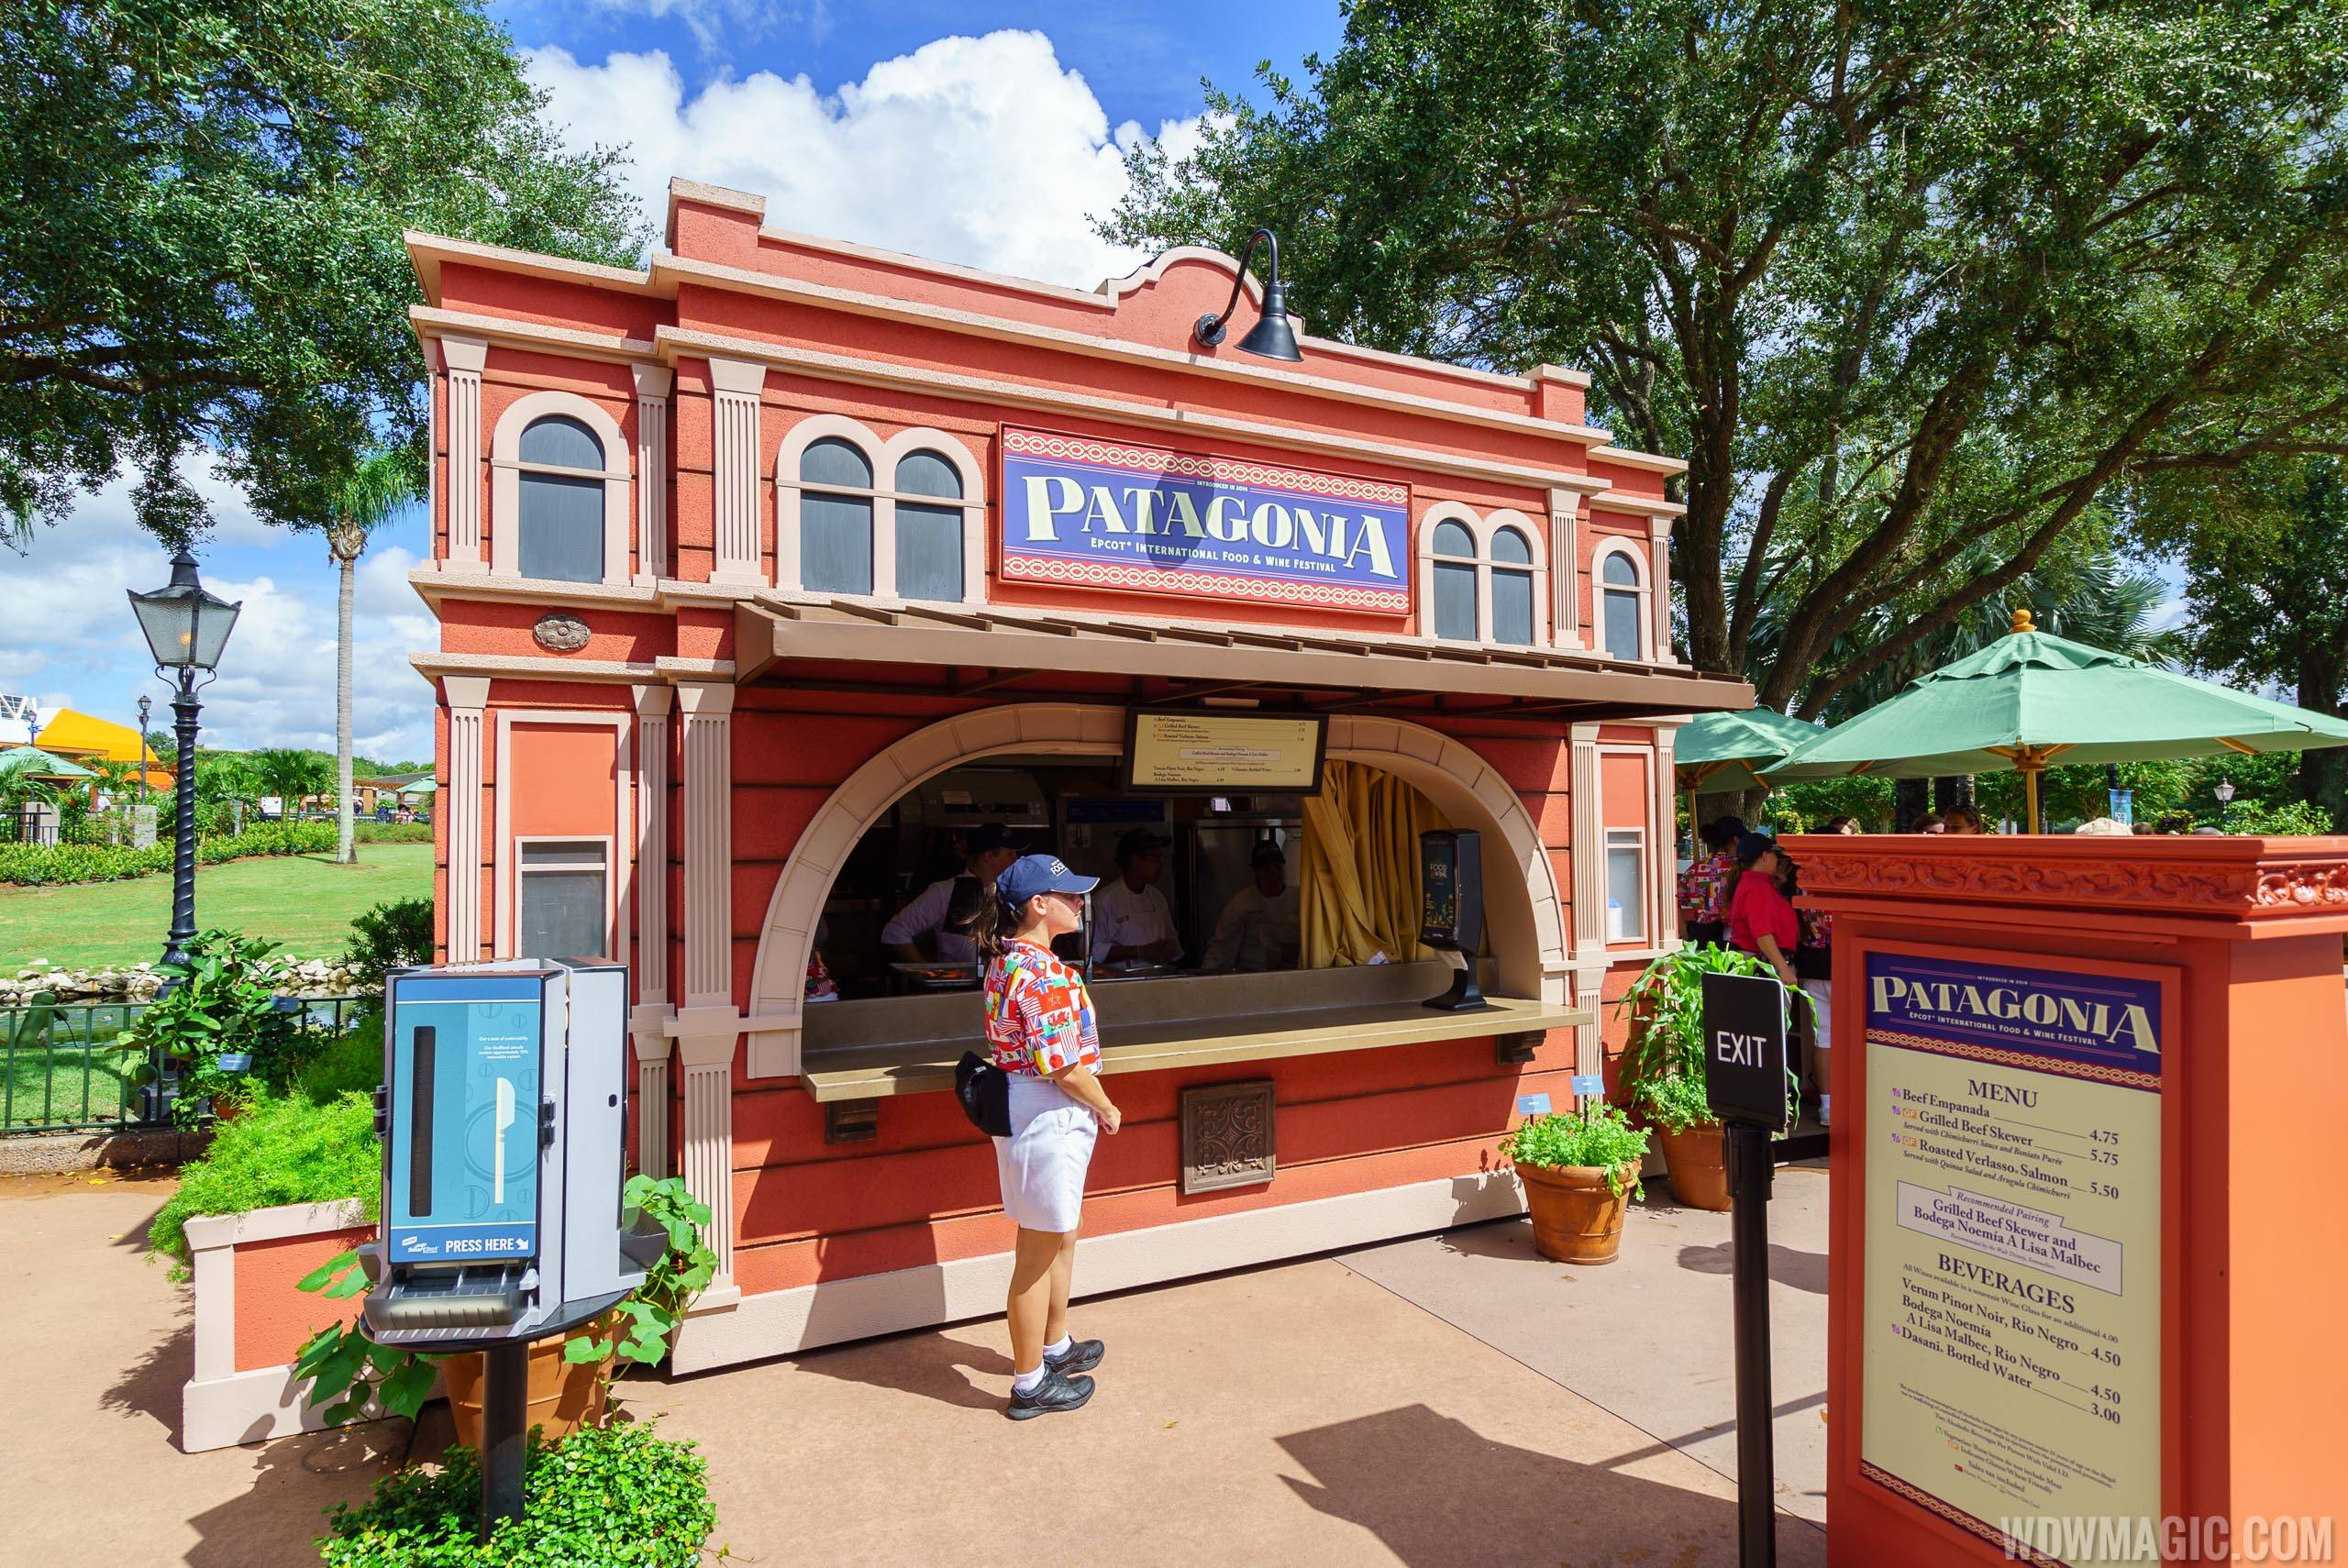 2016 Epcot Food and Wine Festival - Patagonia kiosk